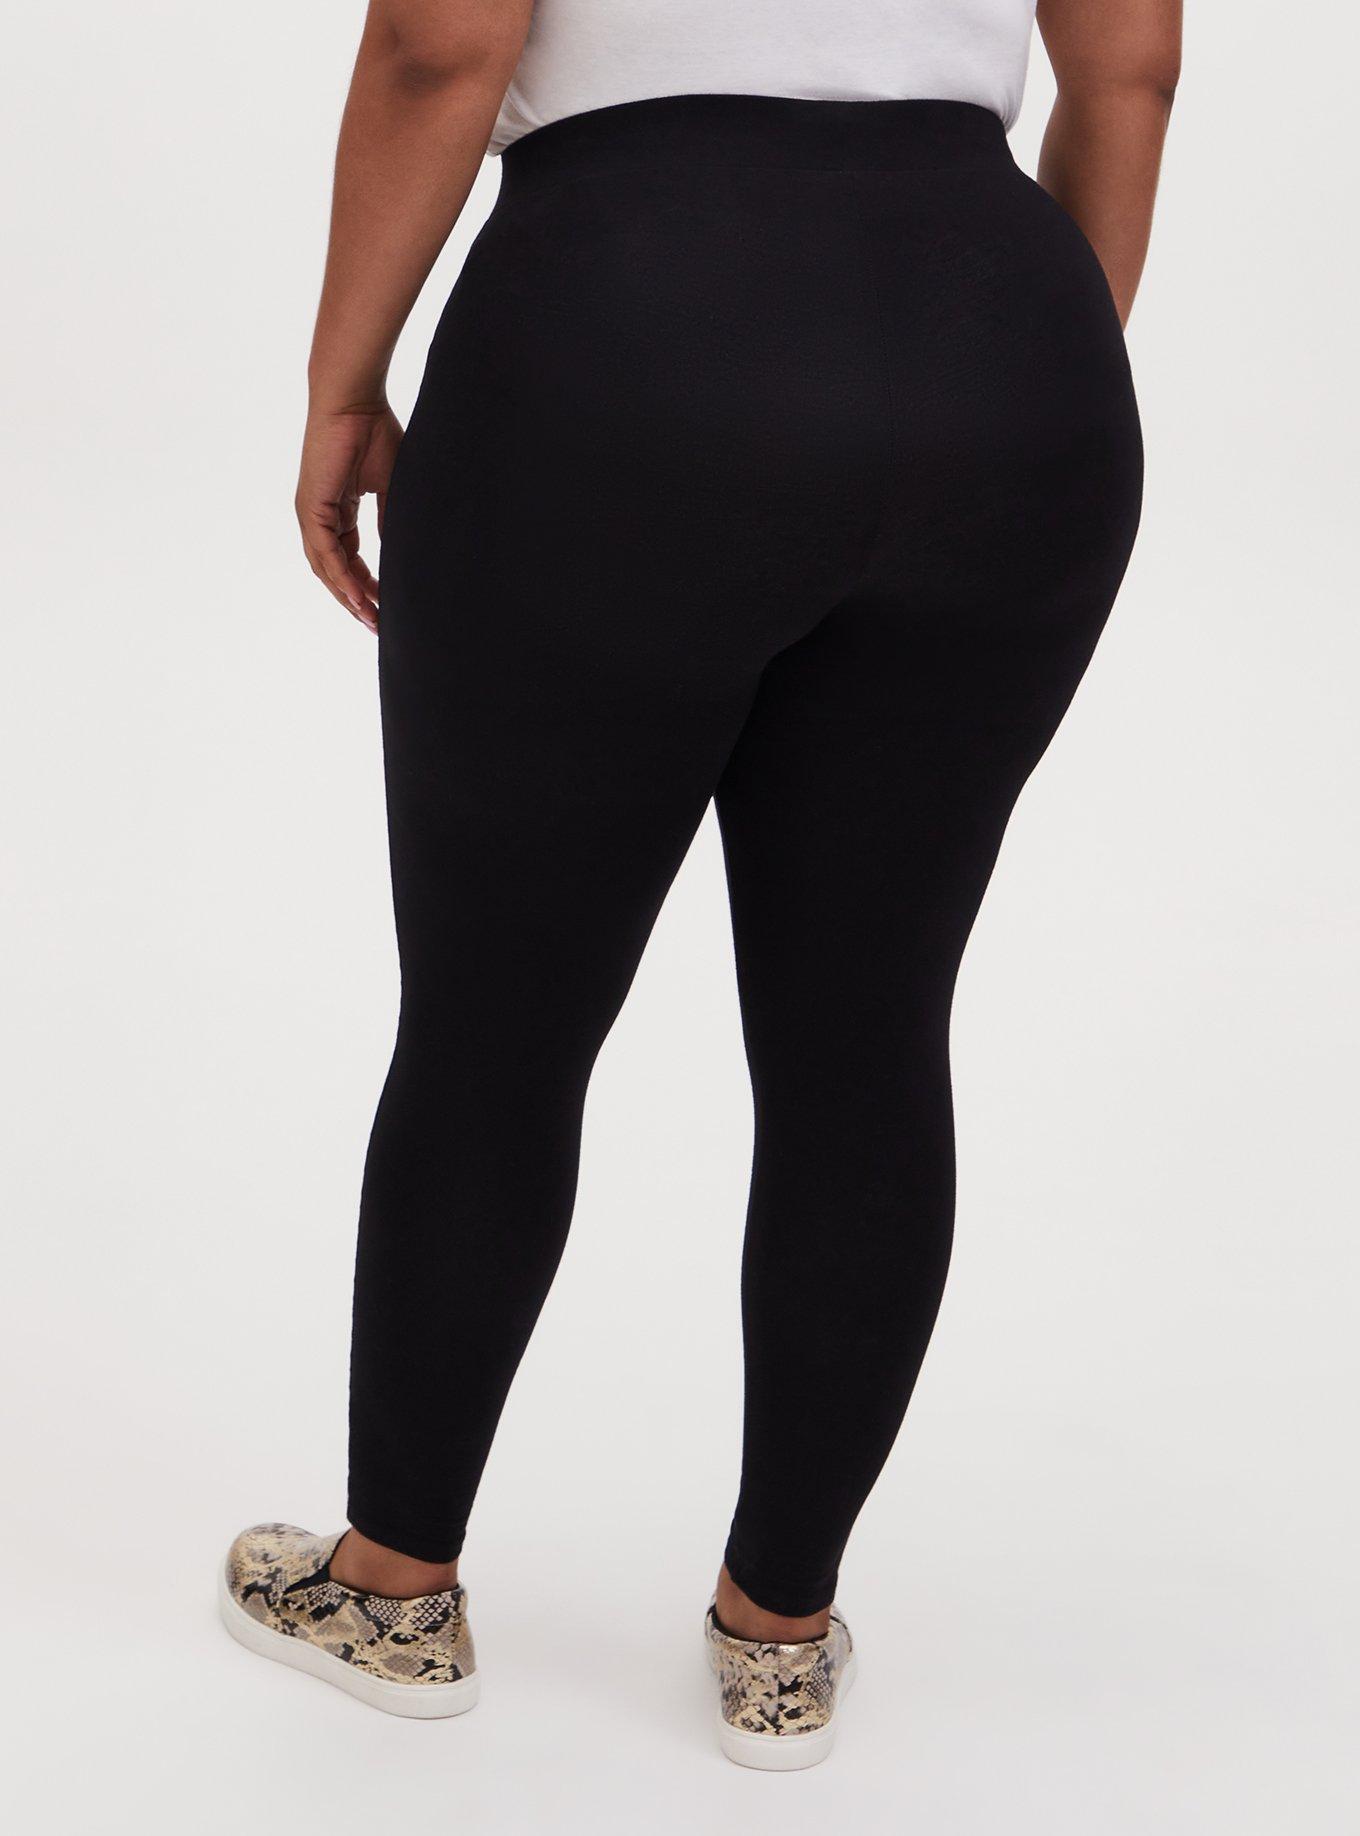 Plus Size Ripped Tights